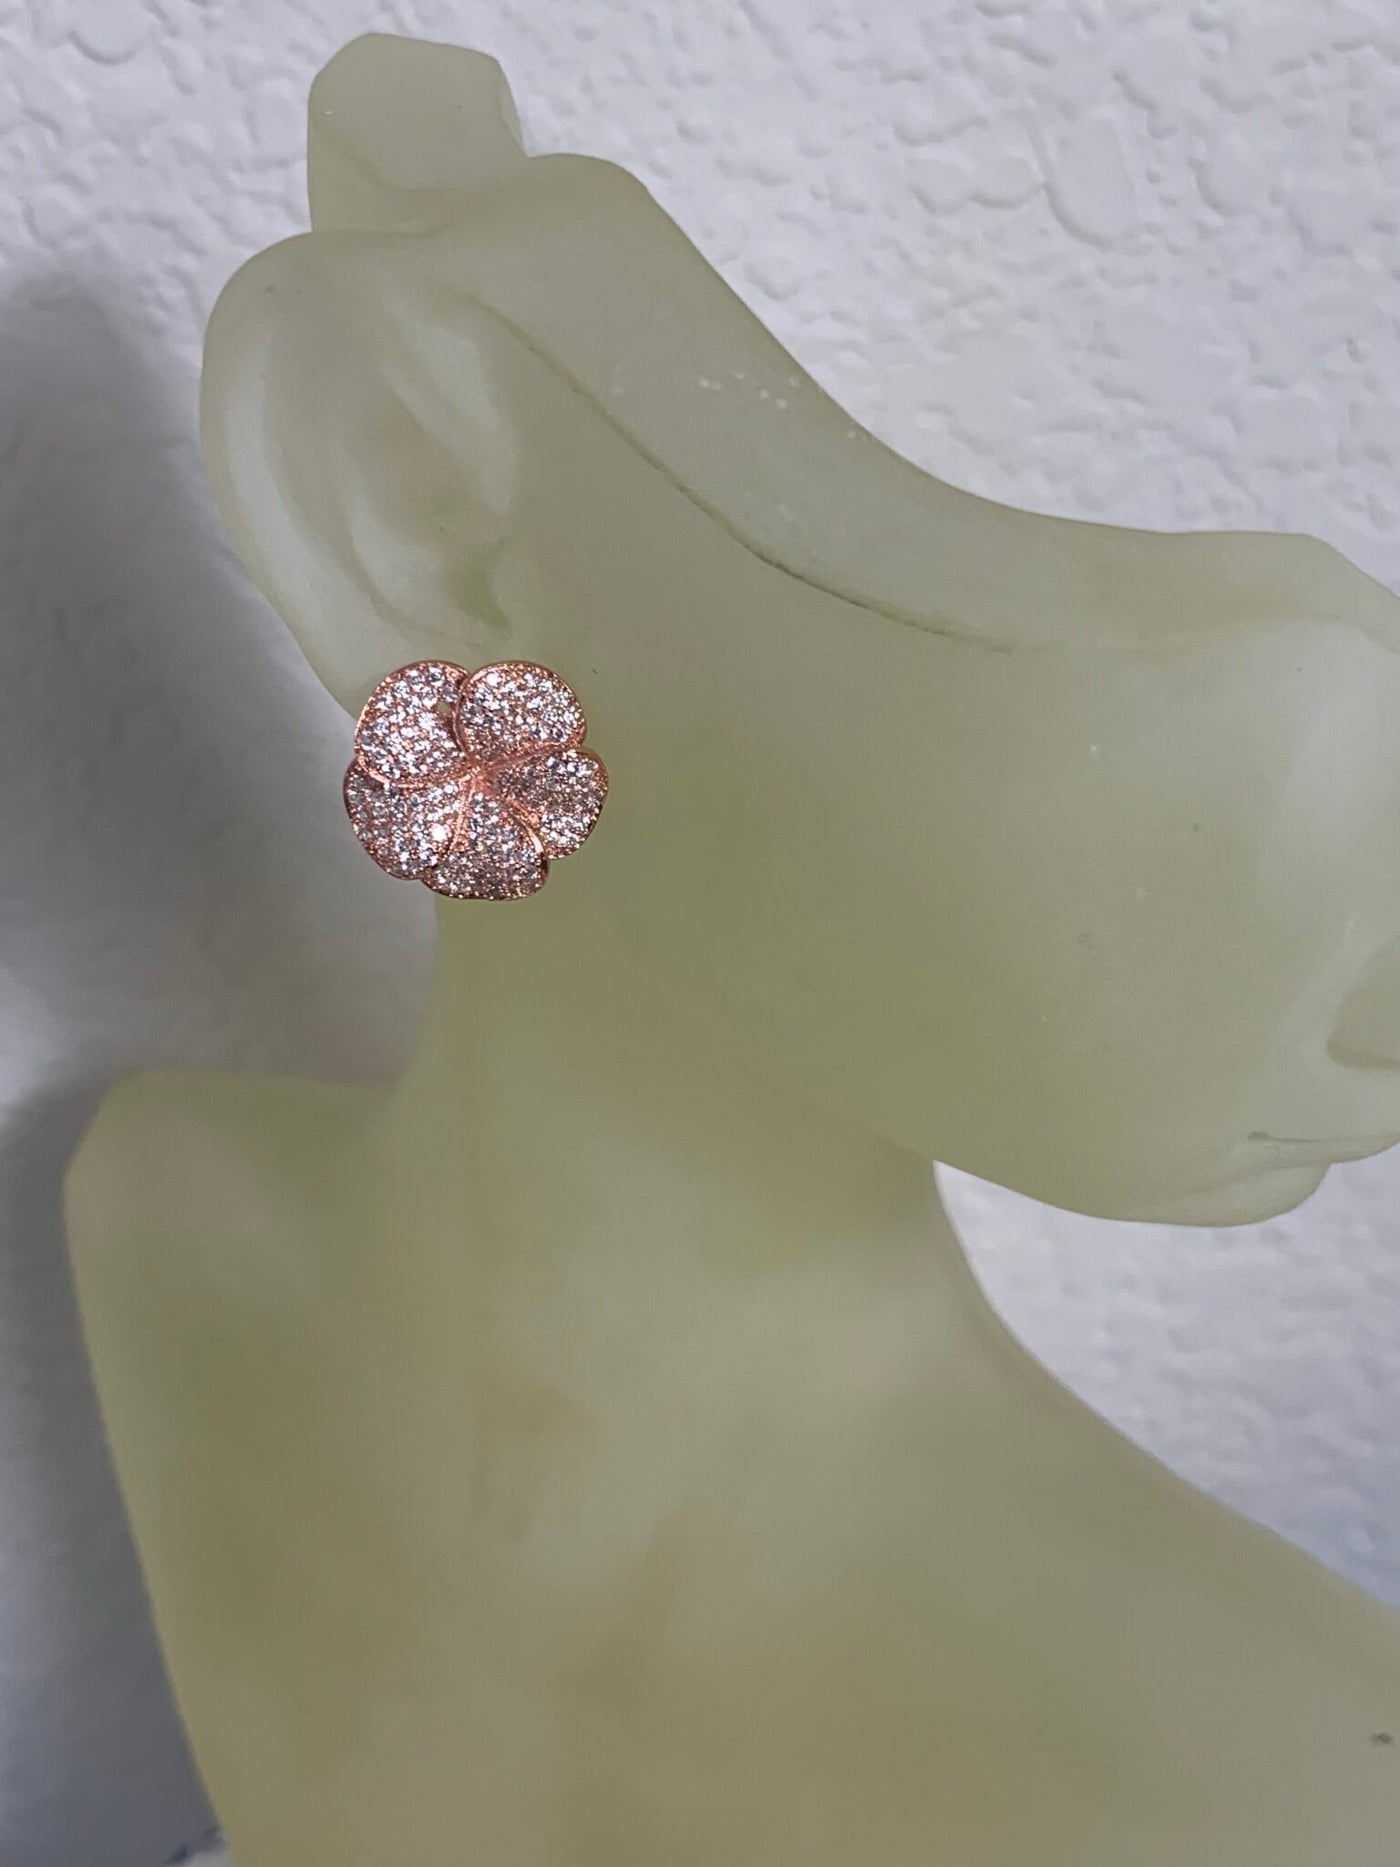 Rose Gold (Pink) Tone Pave Set Cubic Zirconia Flower Earrings on Post